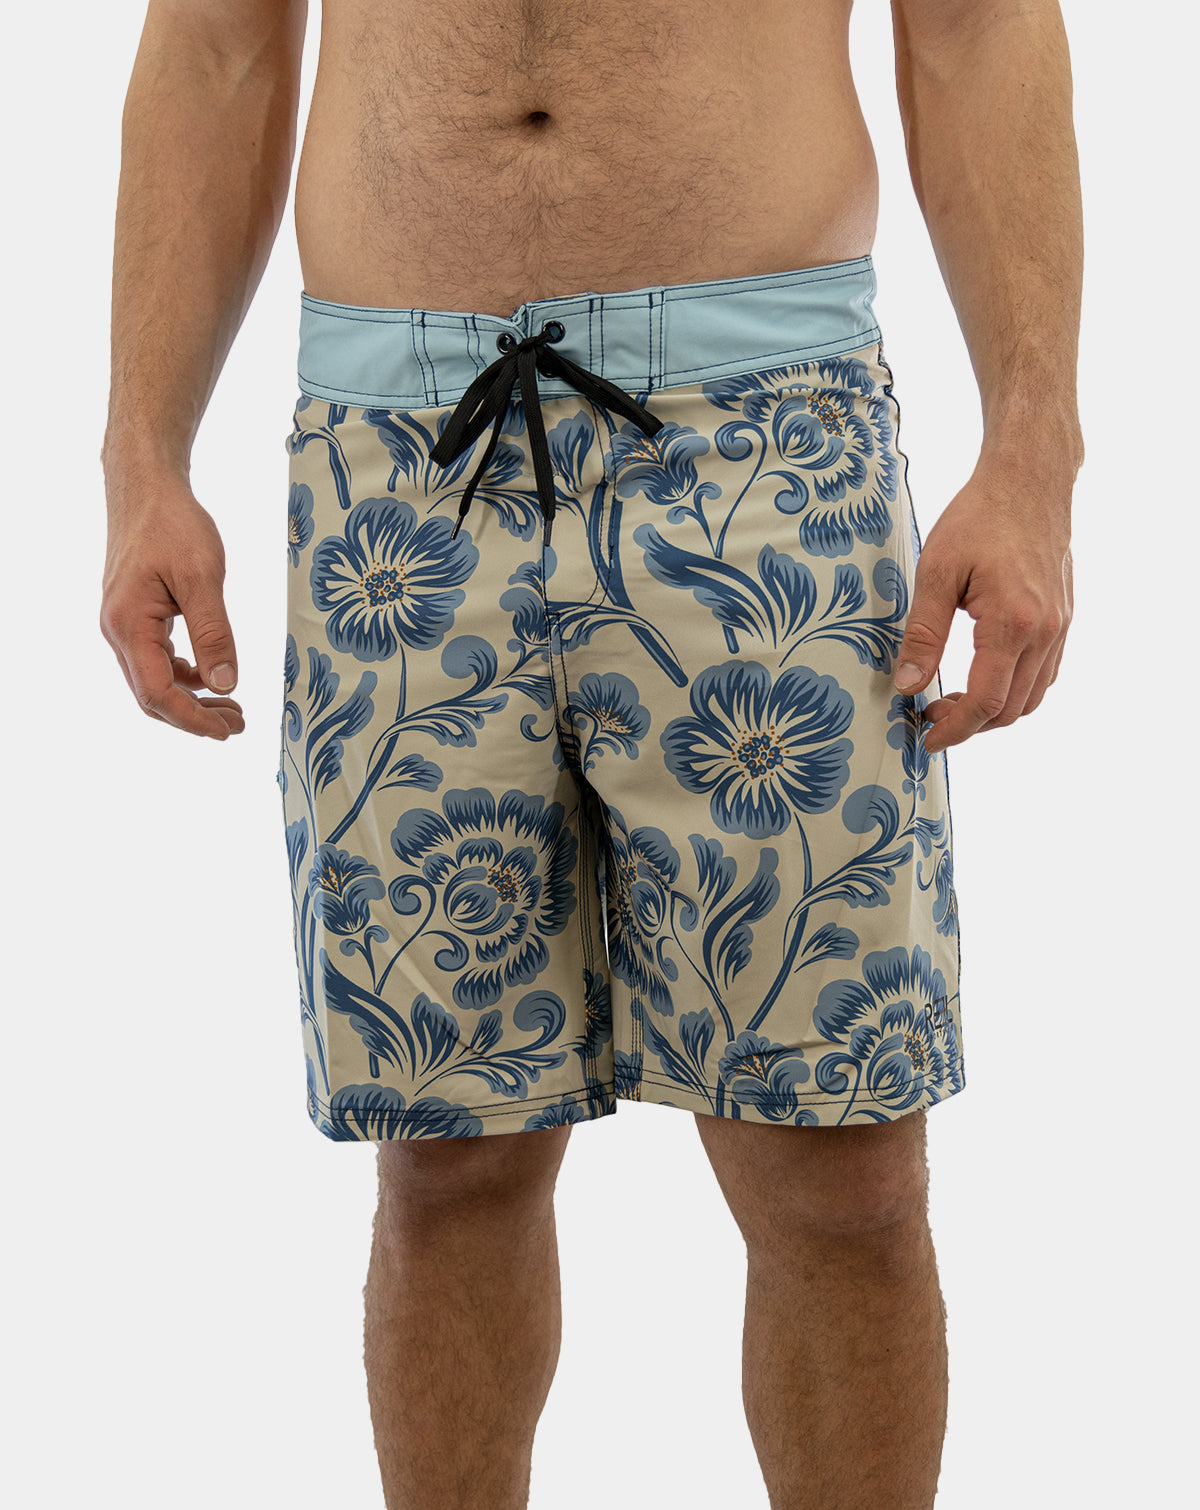 Stylish Sturgill Men's Boardshorts featuring bold floral print in shades of blue and antique white.